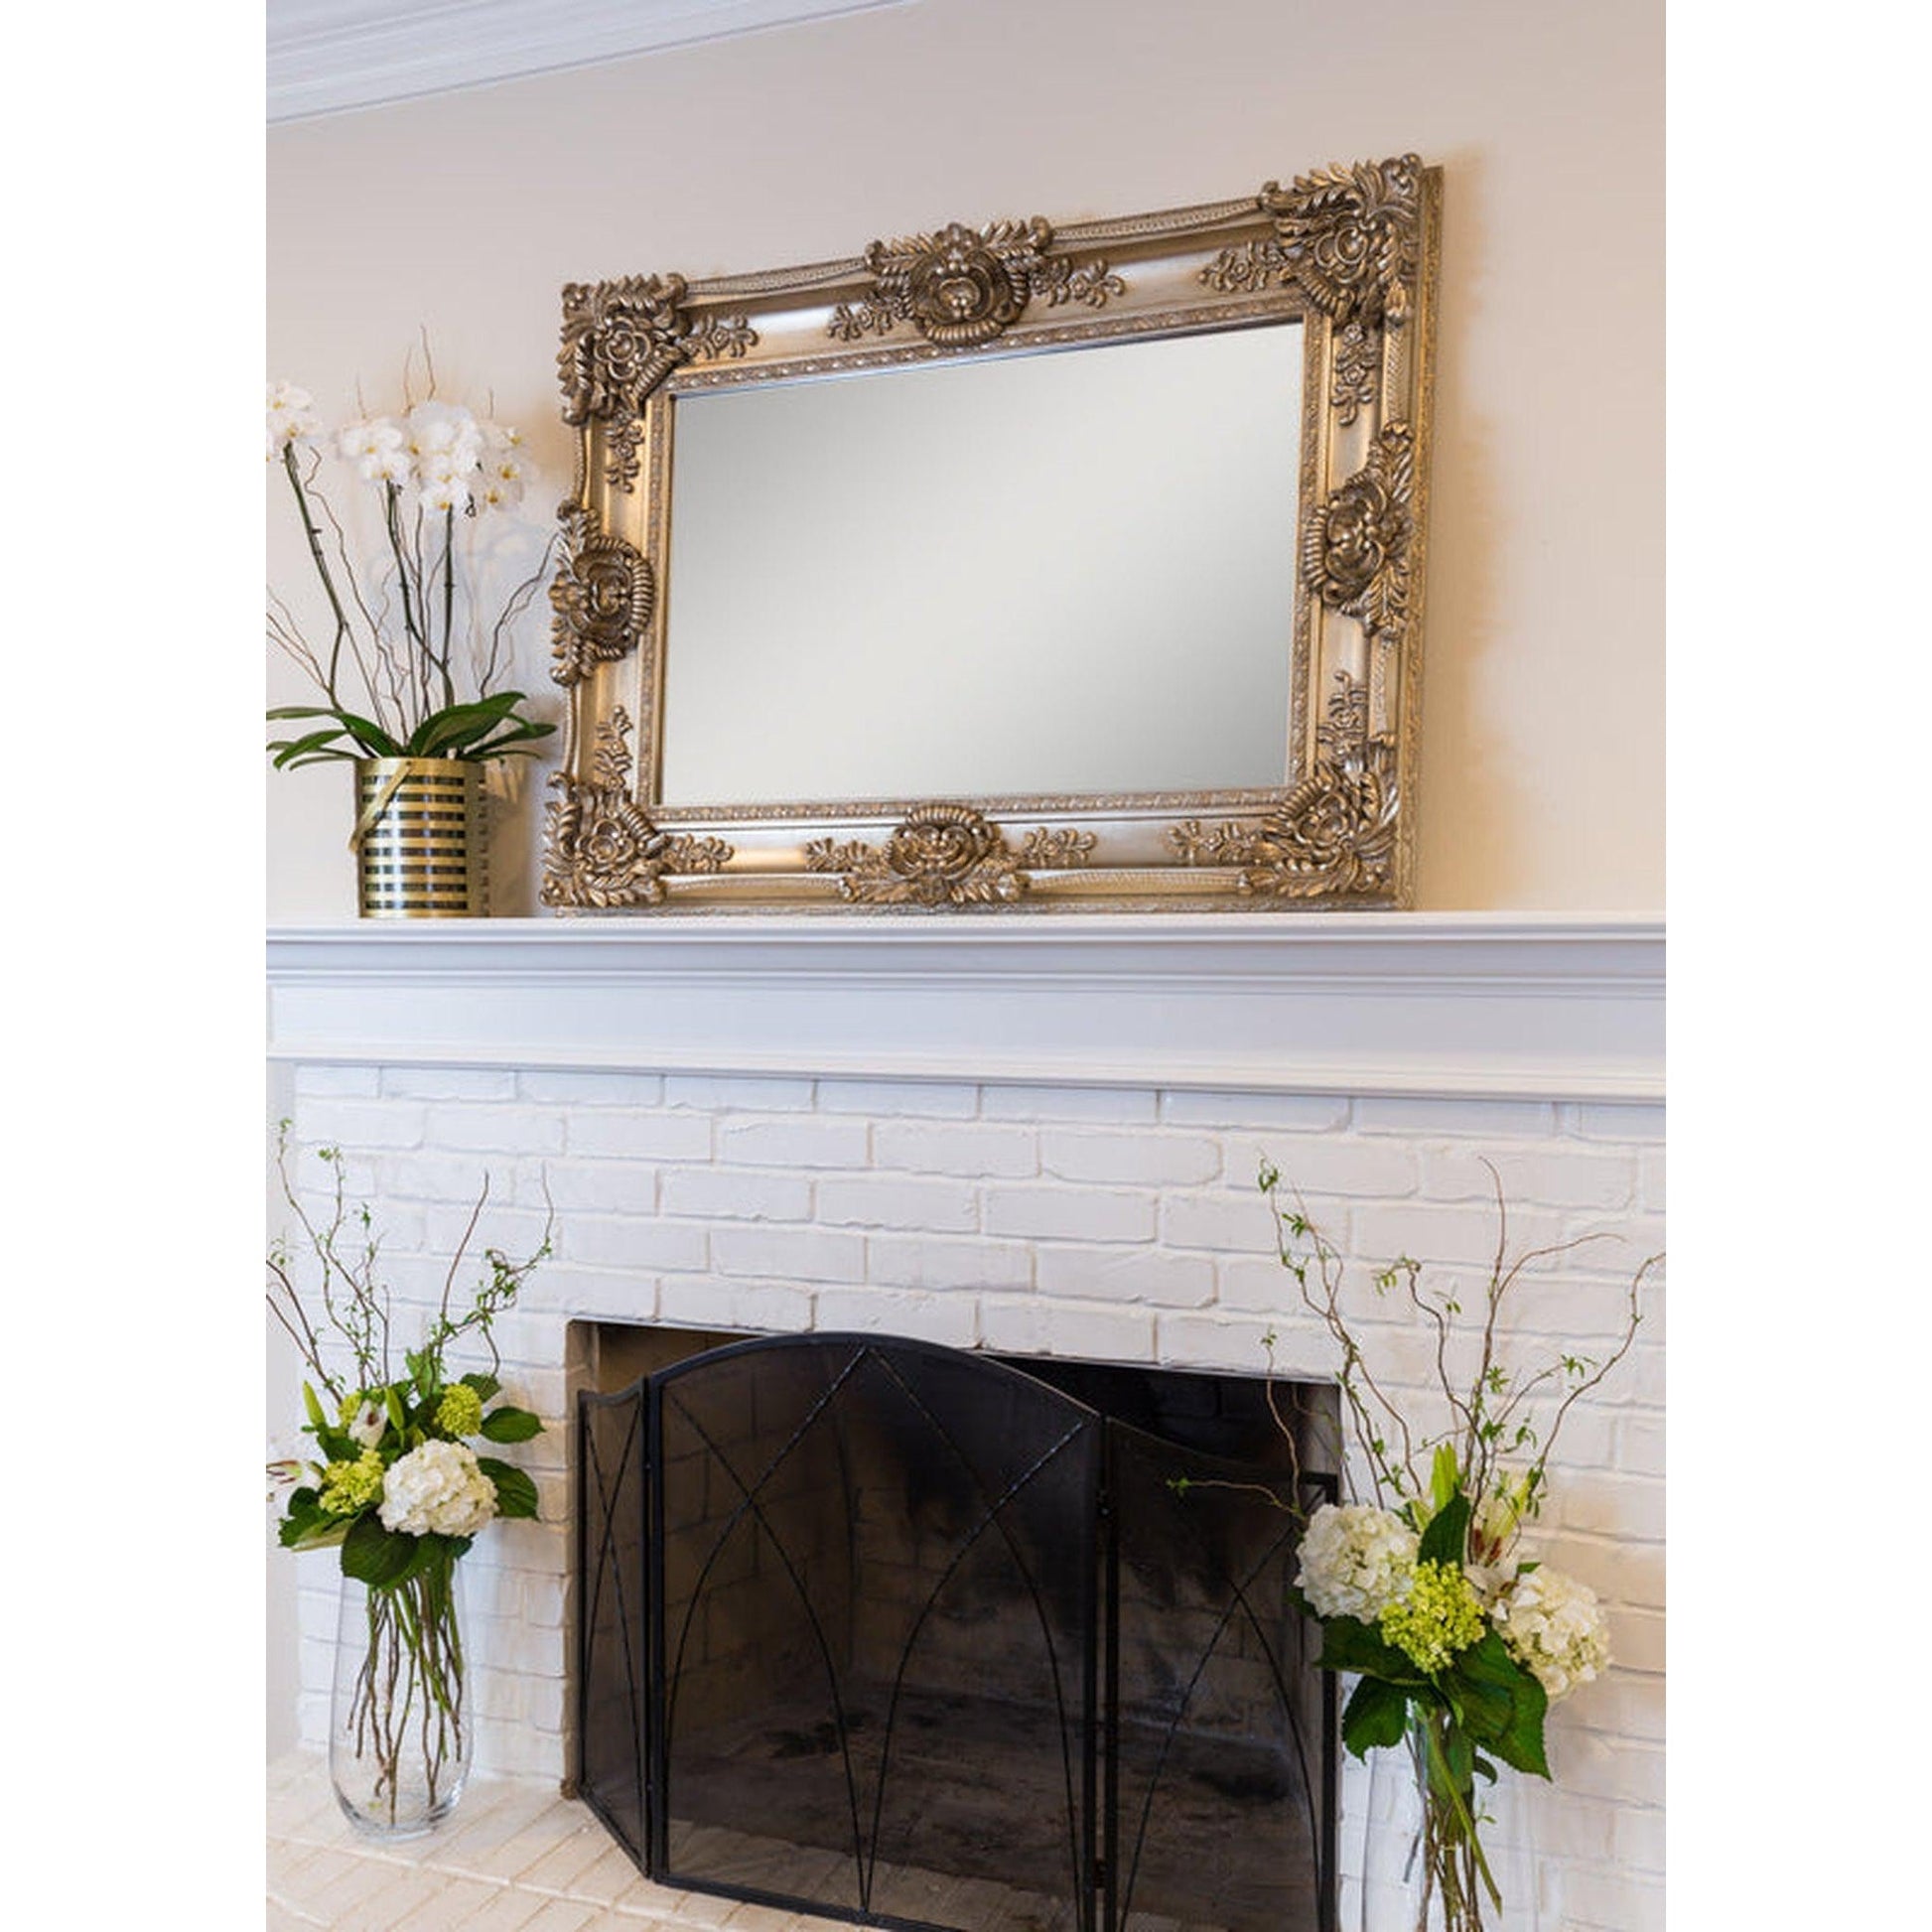 SBC Decor Mayfair Large 35" x 48" Wall-Mounted Full Length Wood Frame Dresser Wall Mirror In Champagne Gold Finish